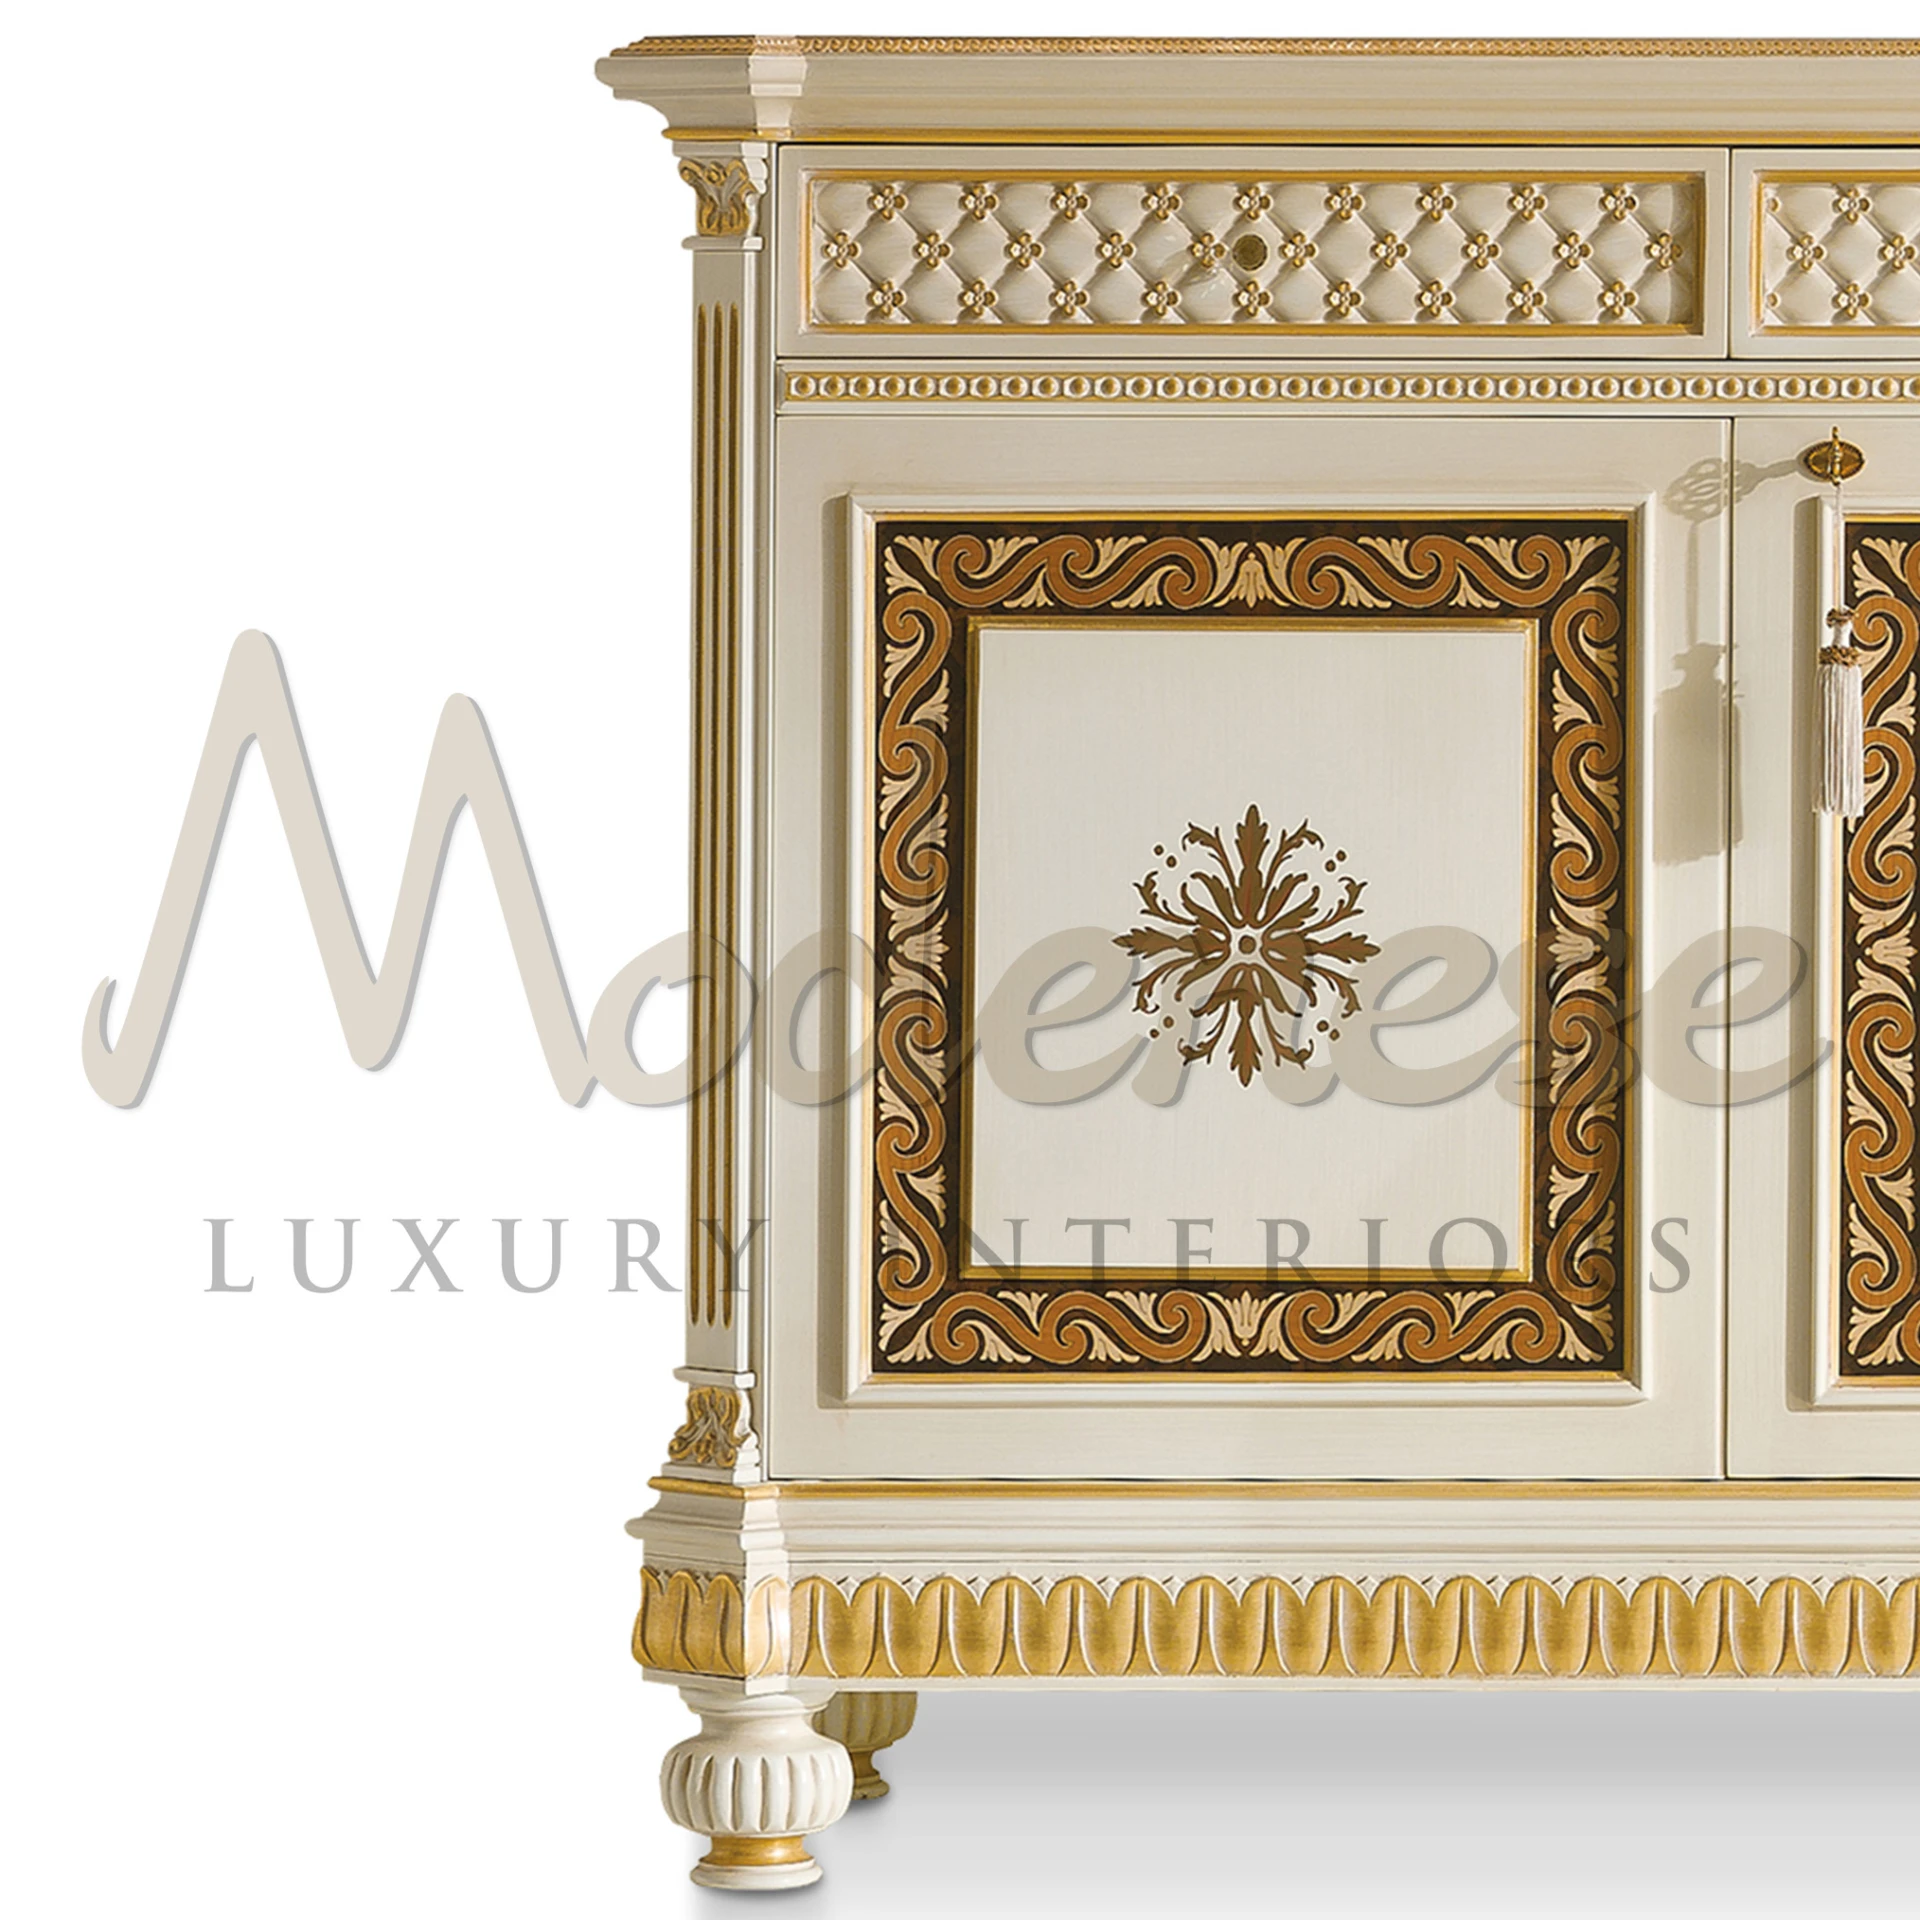 a close up view of luxurious Victorian 2-door sideboard in a rich golden color.